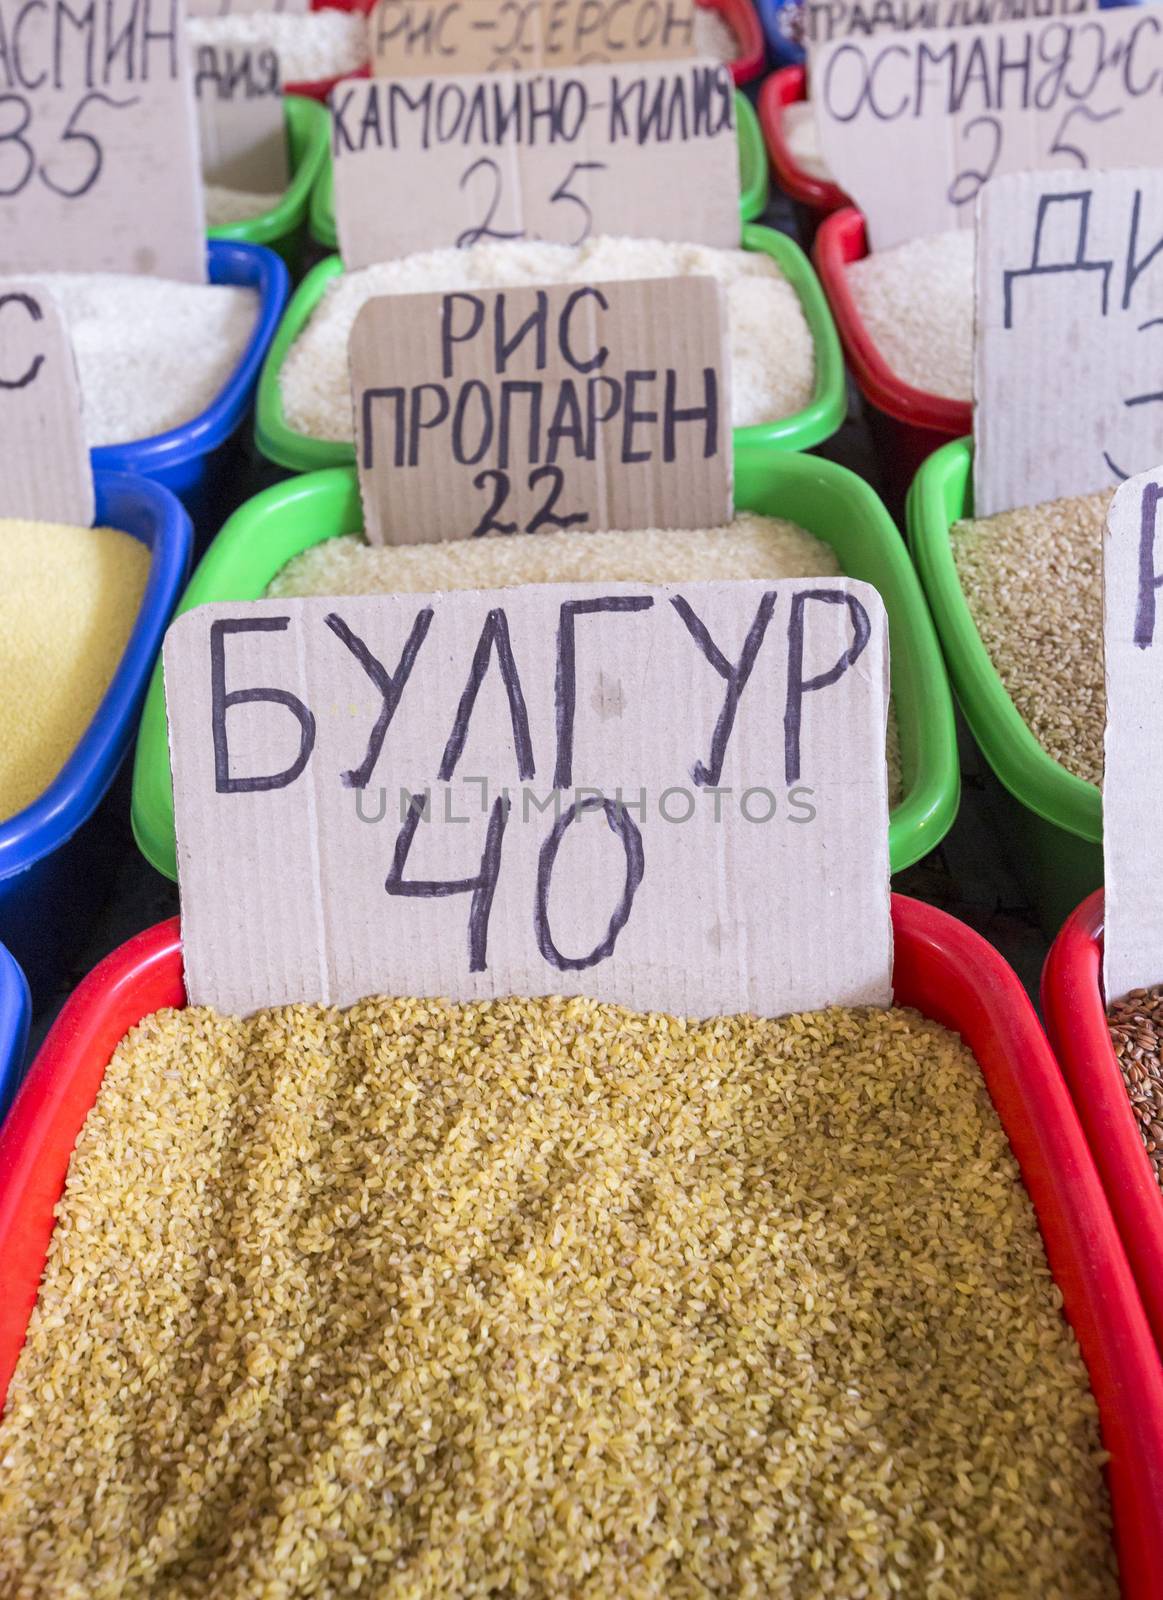 Sale of spices market in Ukraine. The price tags on each product with the title.